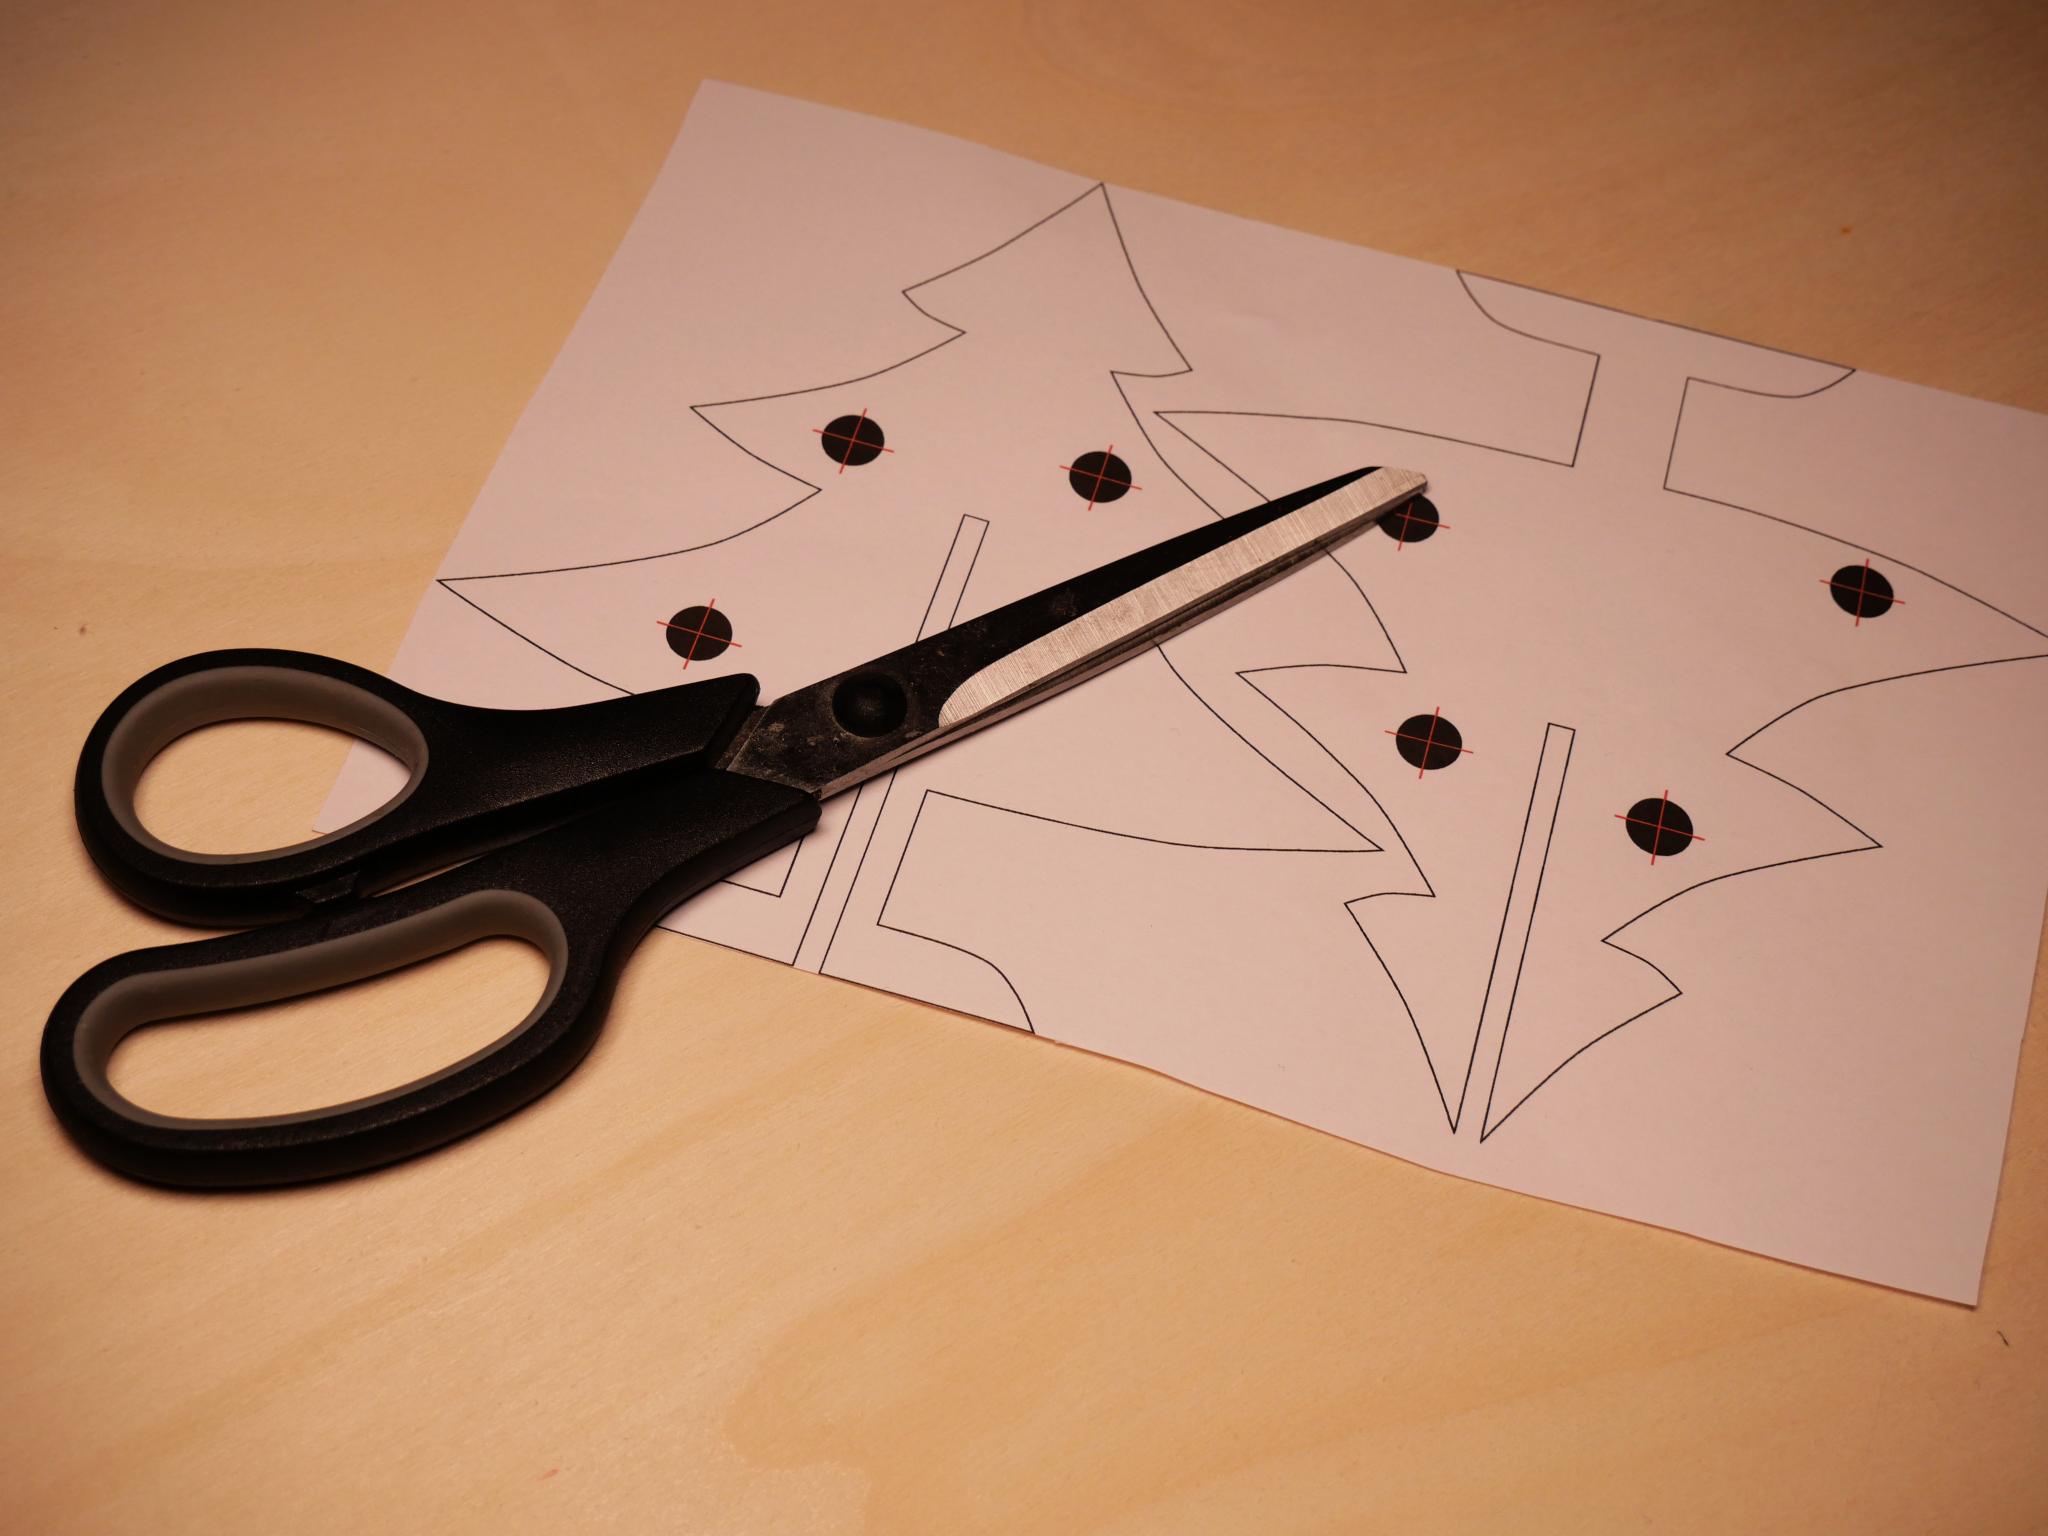 Cut away the large paper border around the templates